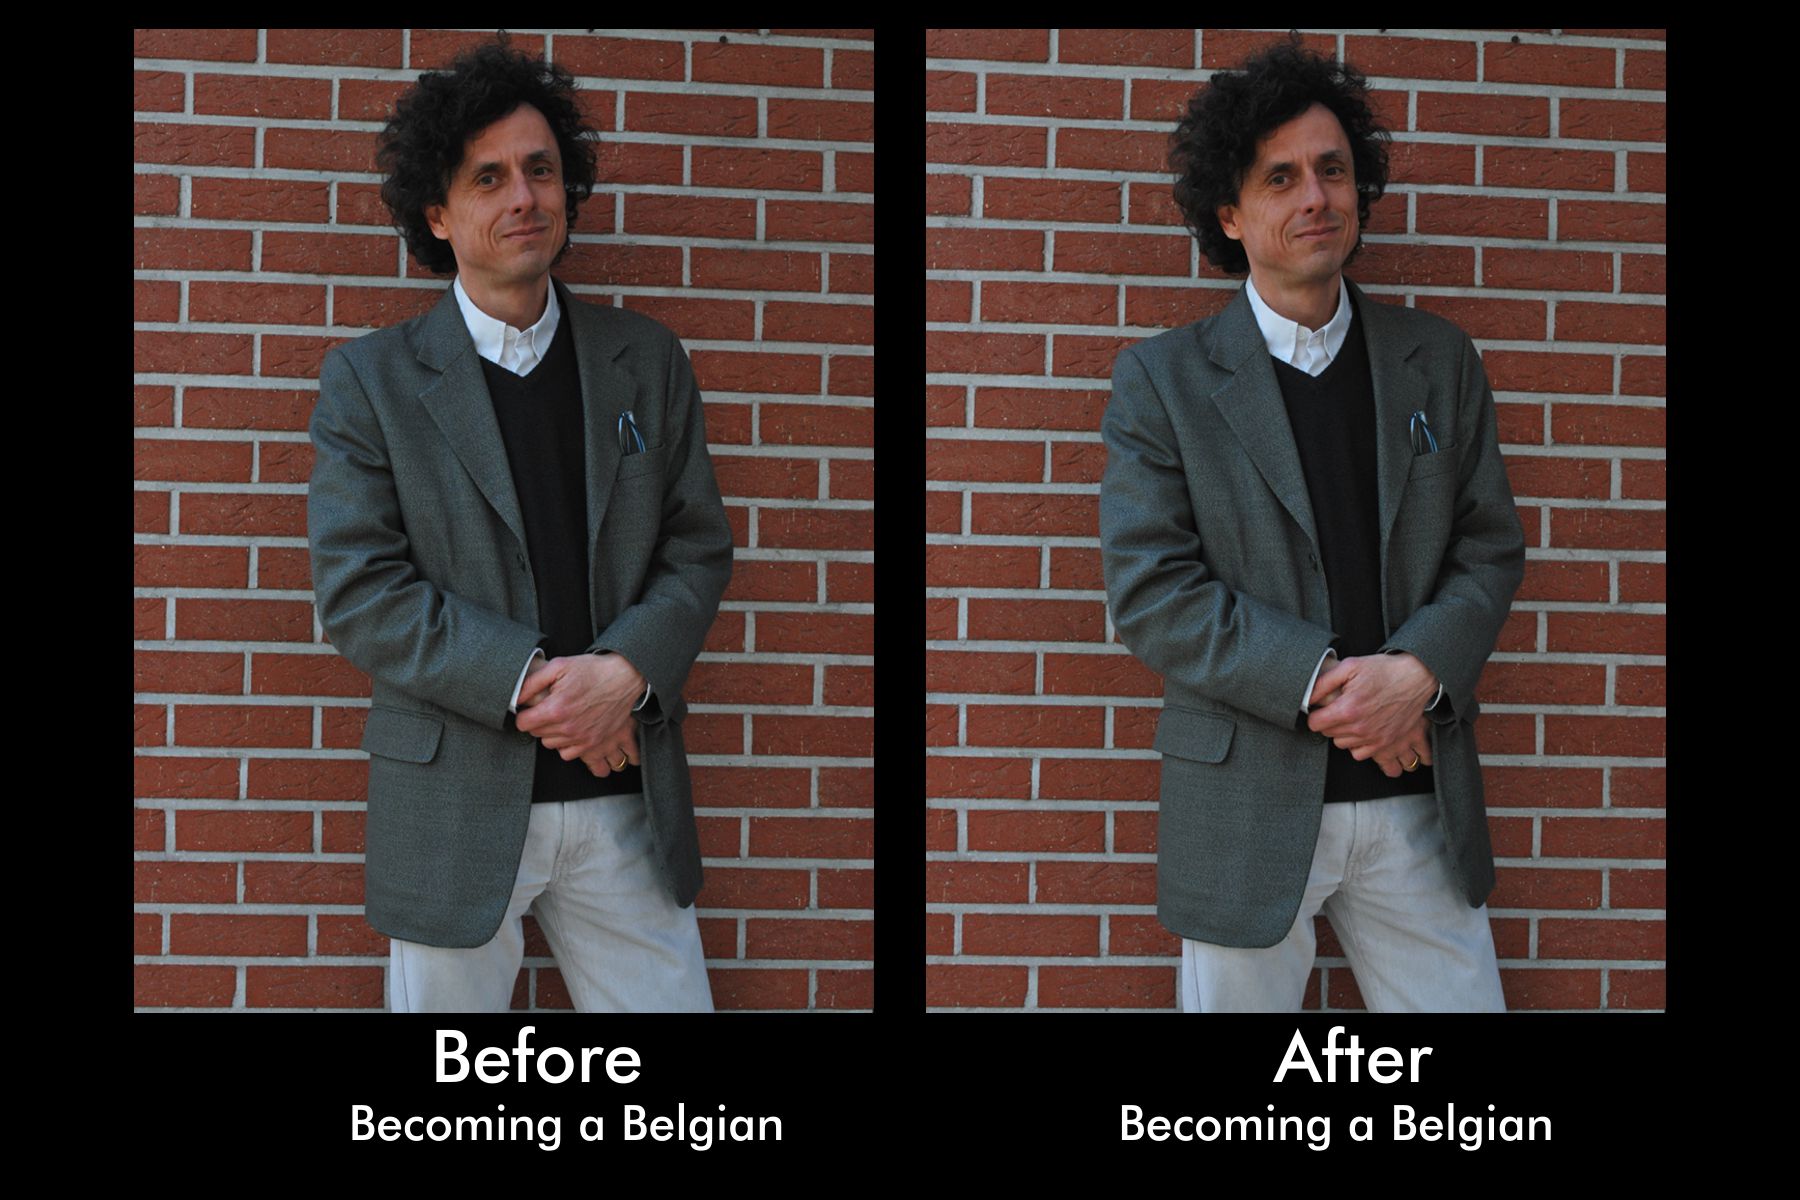 Becoming Belgian: before and after